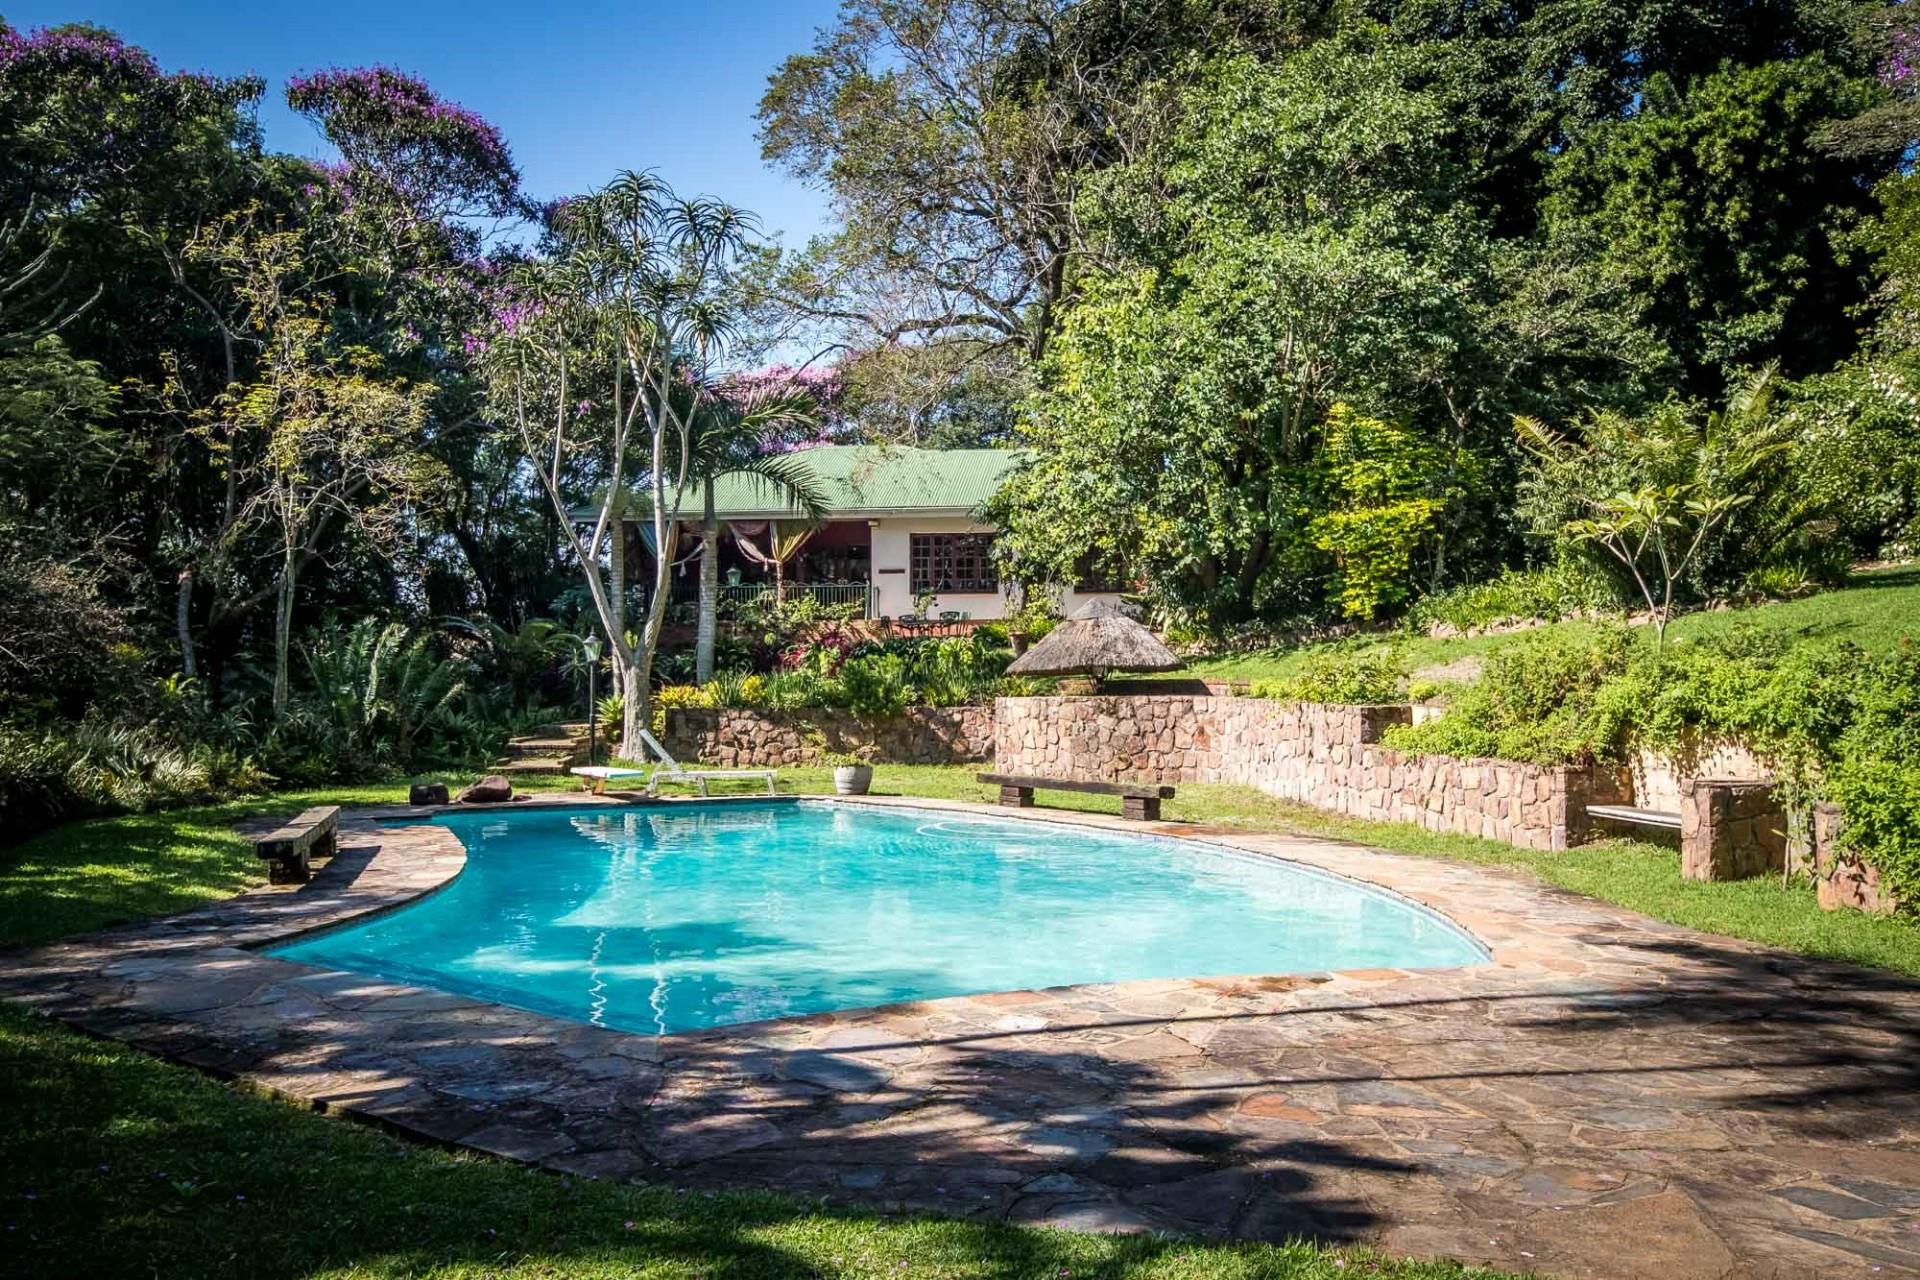 4 Bedroom House For Sale in Kloof | RE/MAX™ of Southern Africa